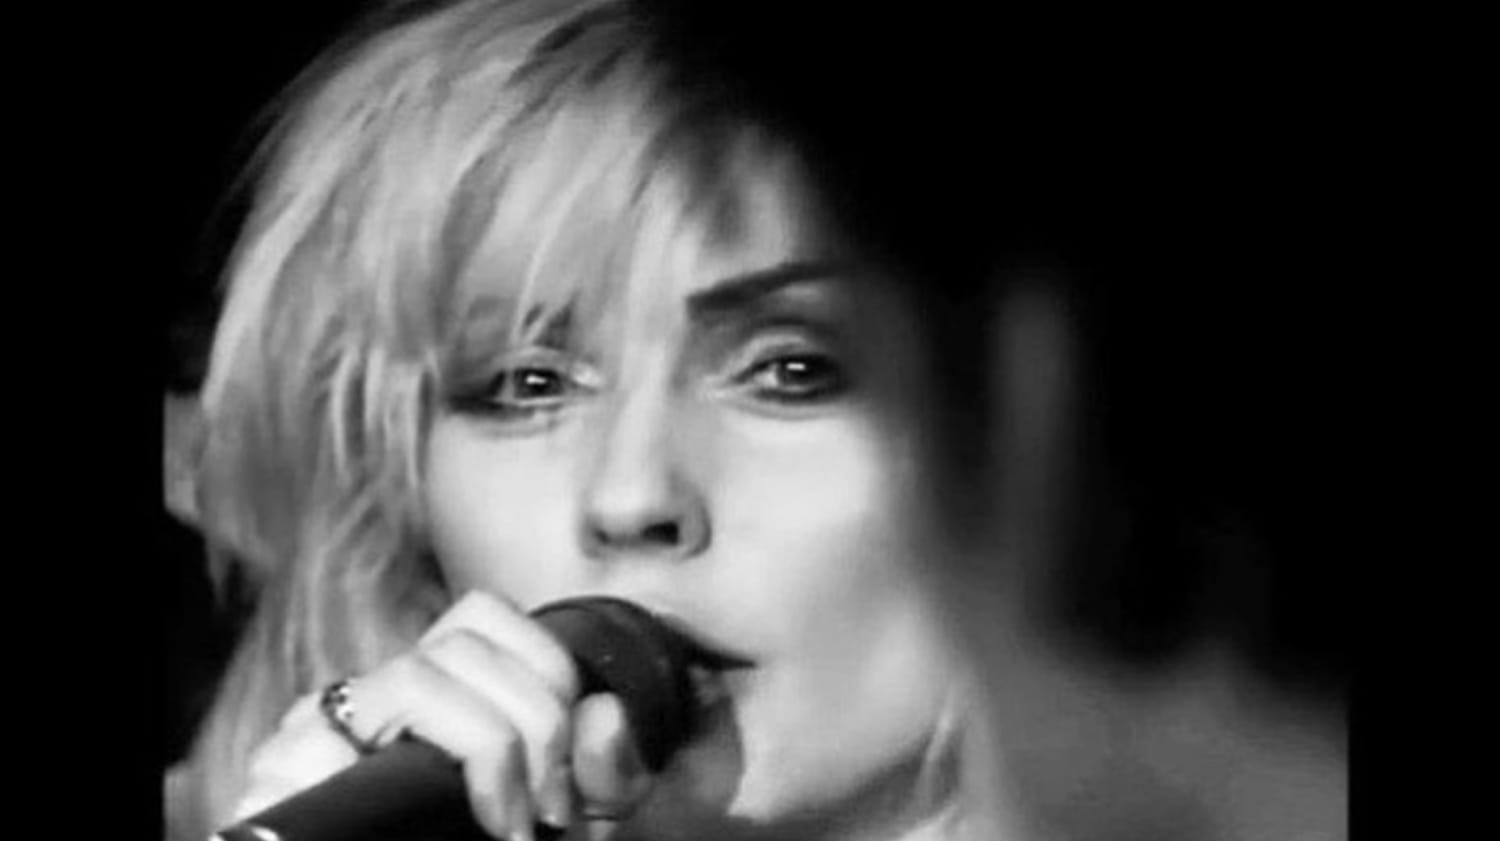 Debbie Harry with James White And The Blacks 'I Feel Good' film by Libin+Cameron (1980)